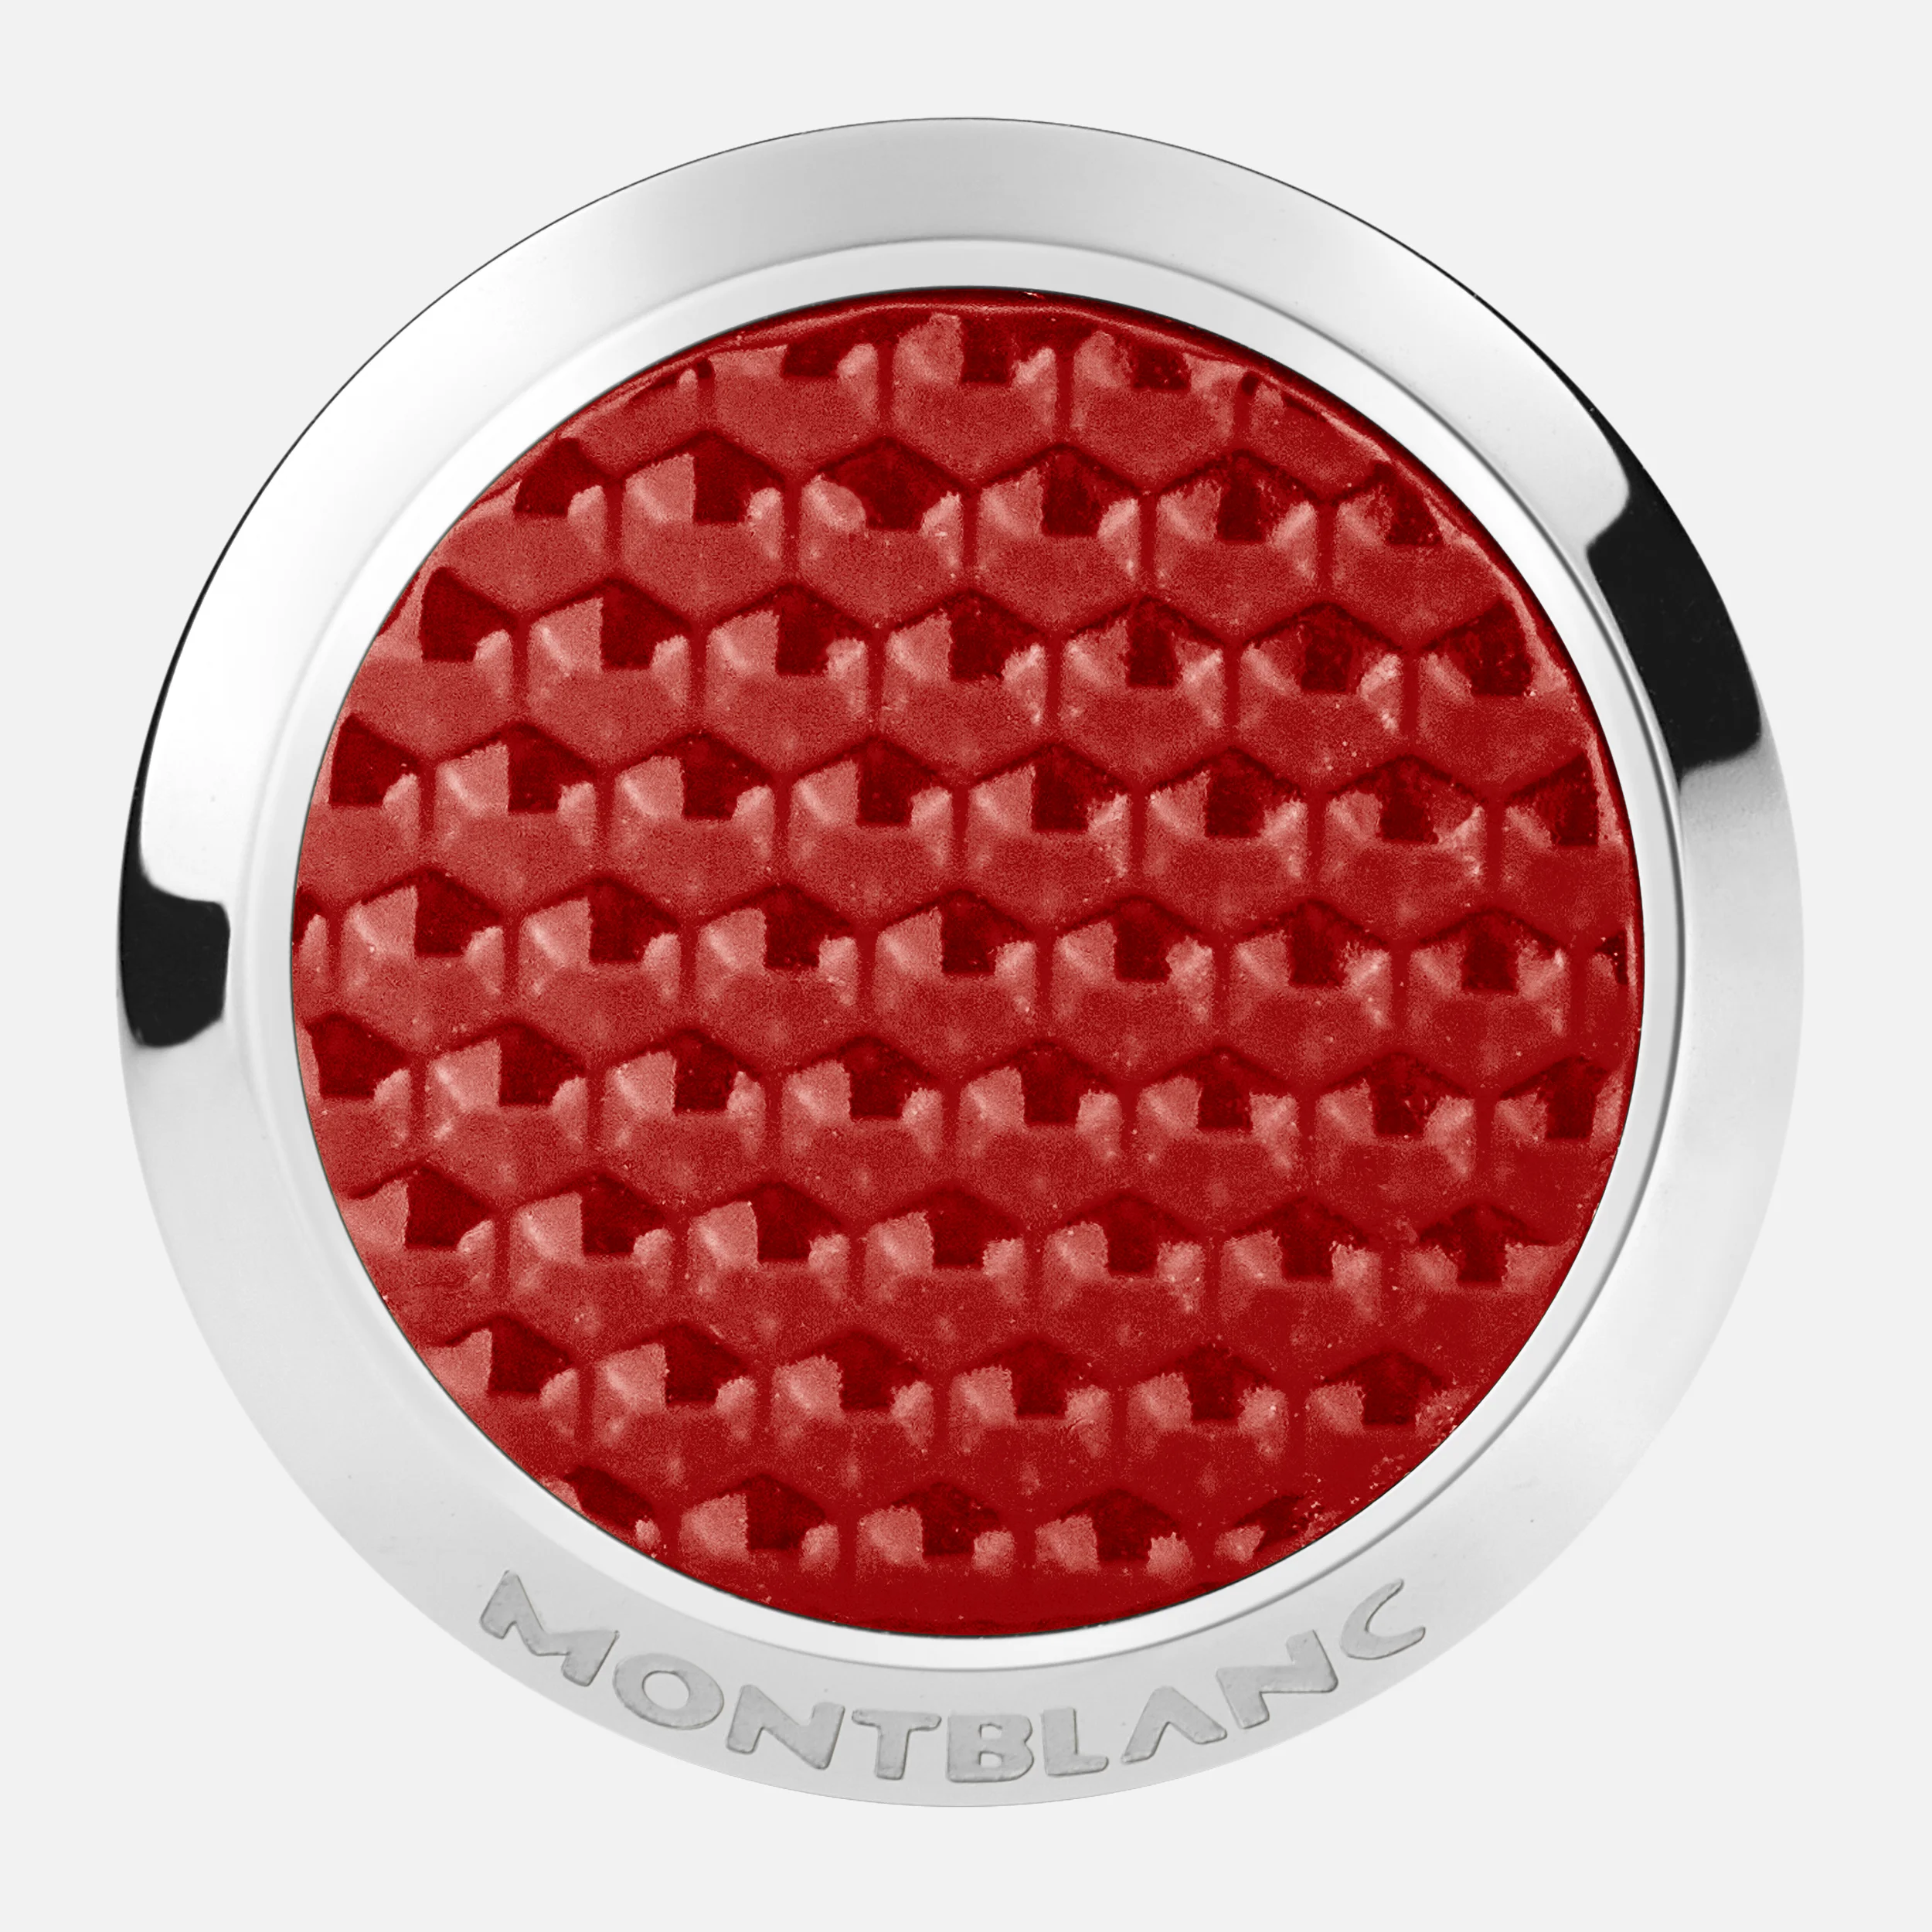 Montblanc Cufflink Red Hour Steel Lacquer - Pencraft the boutique